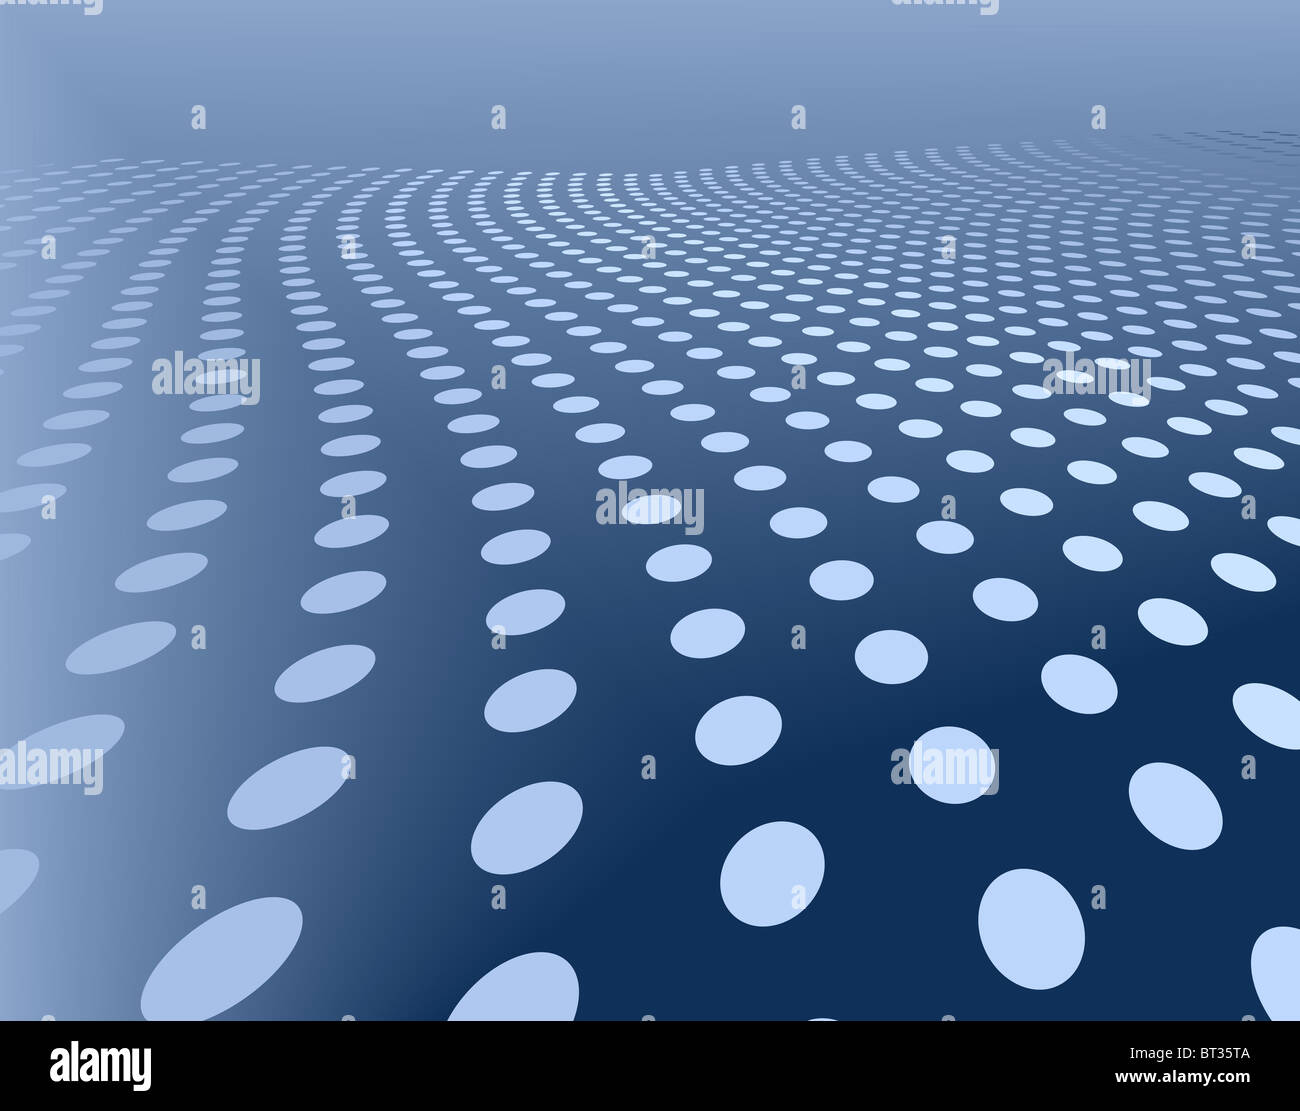 Abstract illustrated design of blue dots Stock Photo